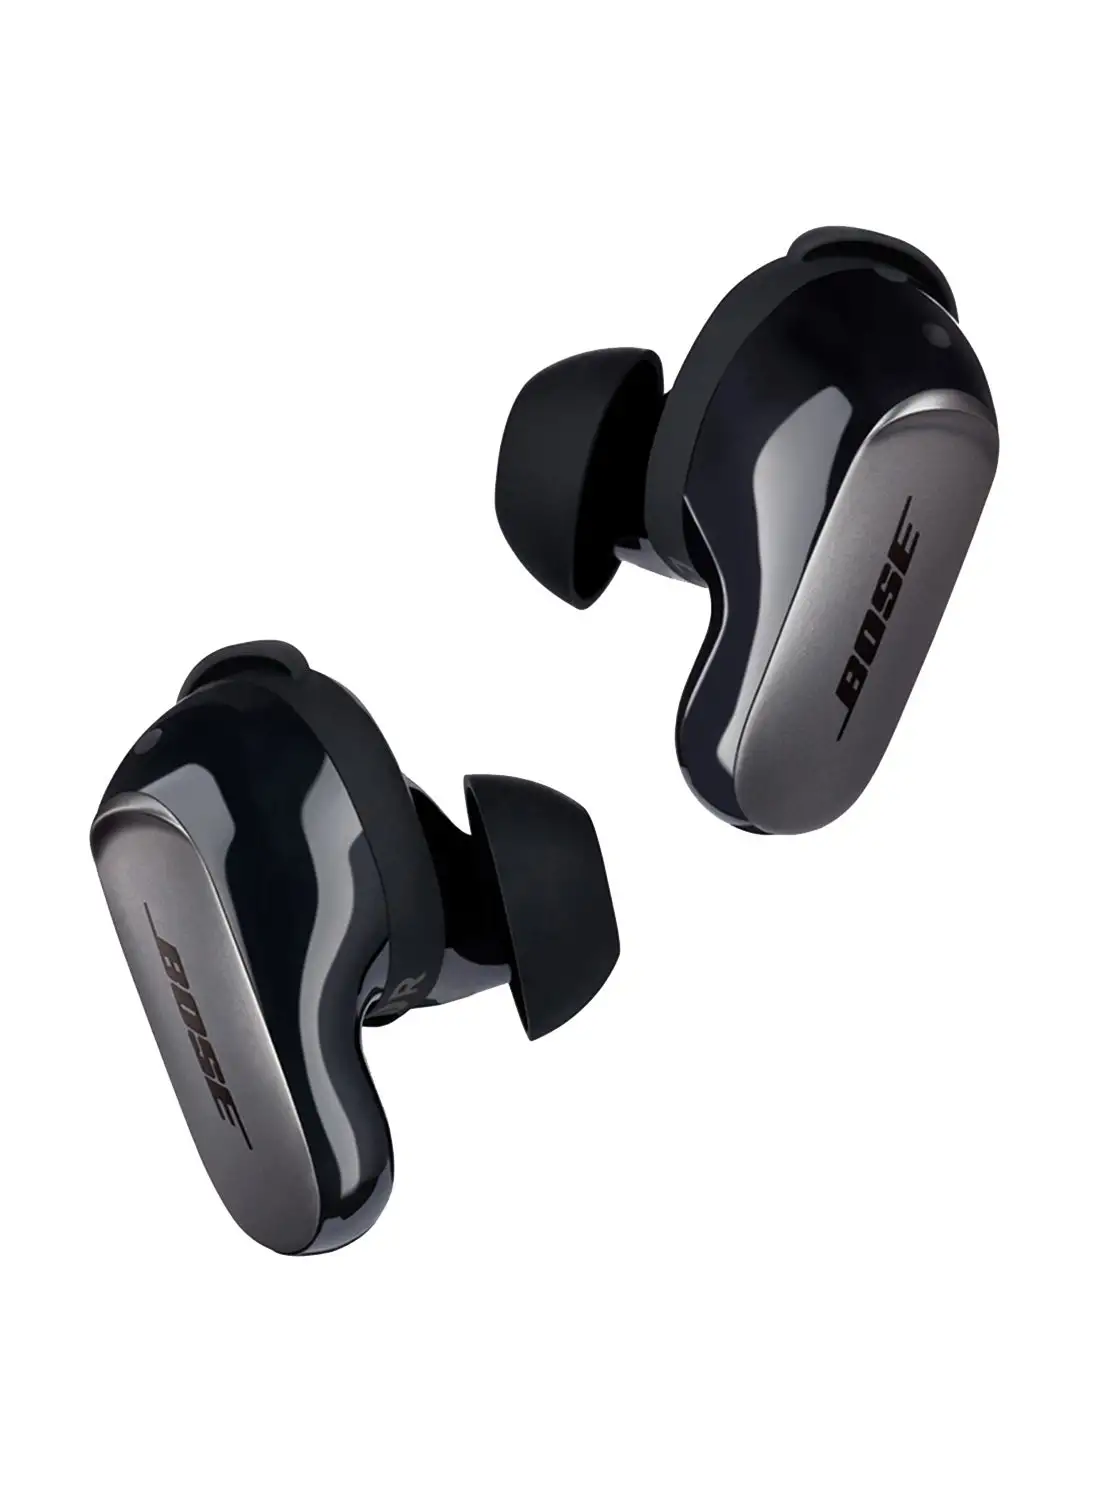 BOSE Quietcomfort Ultra Wireless/Bluetooth Earbuds With Spatial Audio And World-Class Noise Cancellation Black